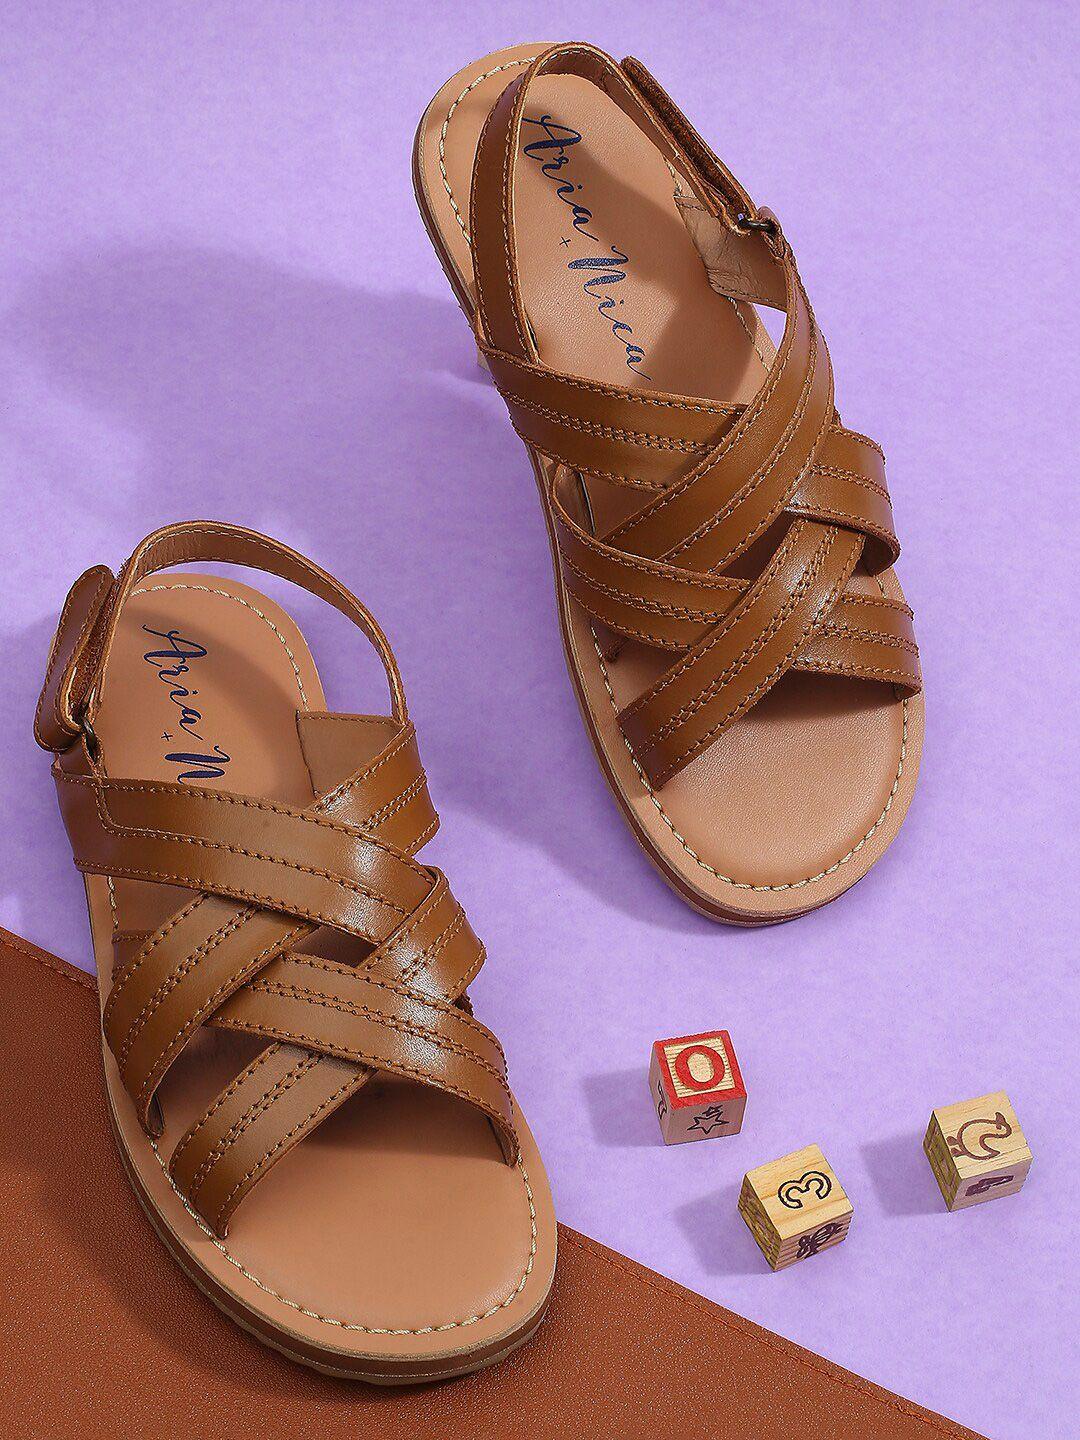 aria-nica-boys-criss-cross-strap-leather-comfort-sandals